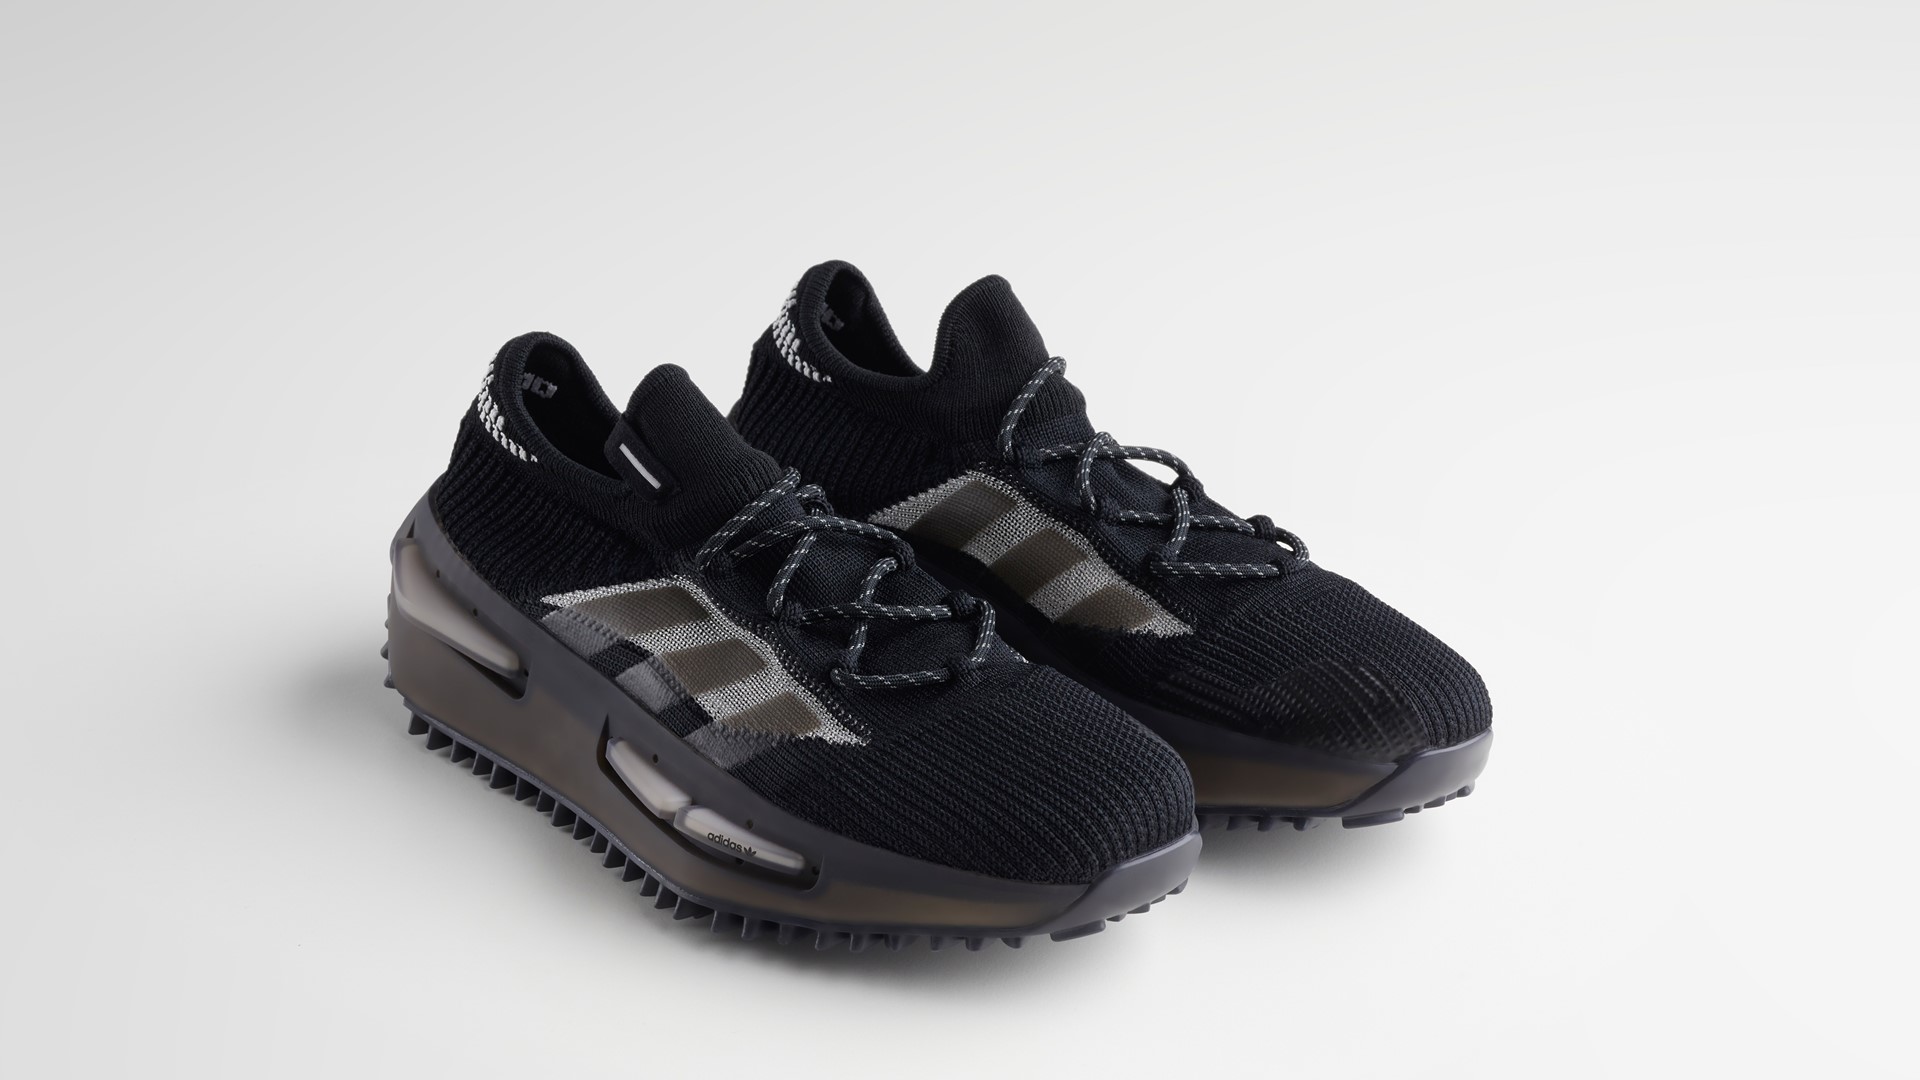 Tirannie Leeuw Tot adidas Originals Launches a Brand New Black Colorway of the NMD S1  Silhouette